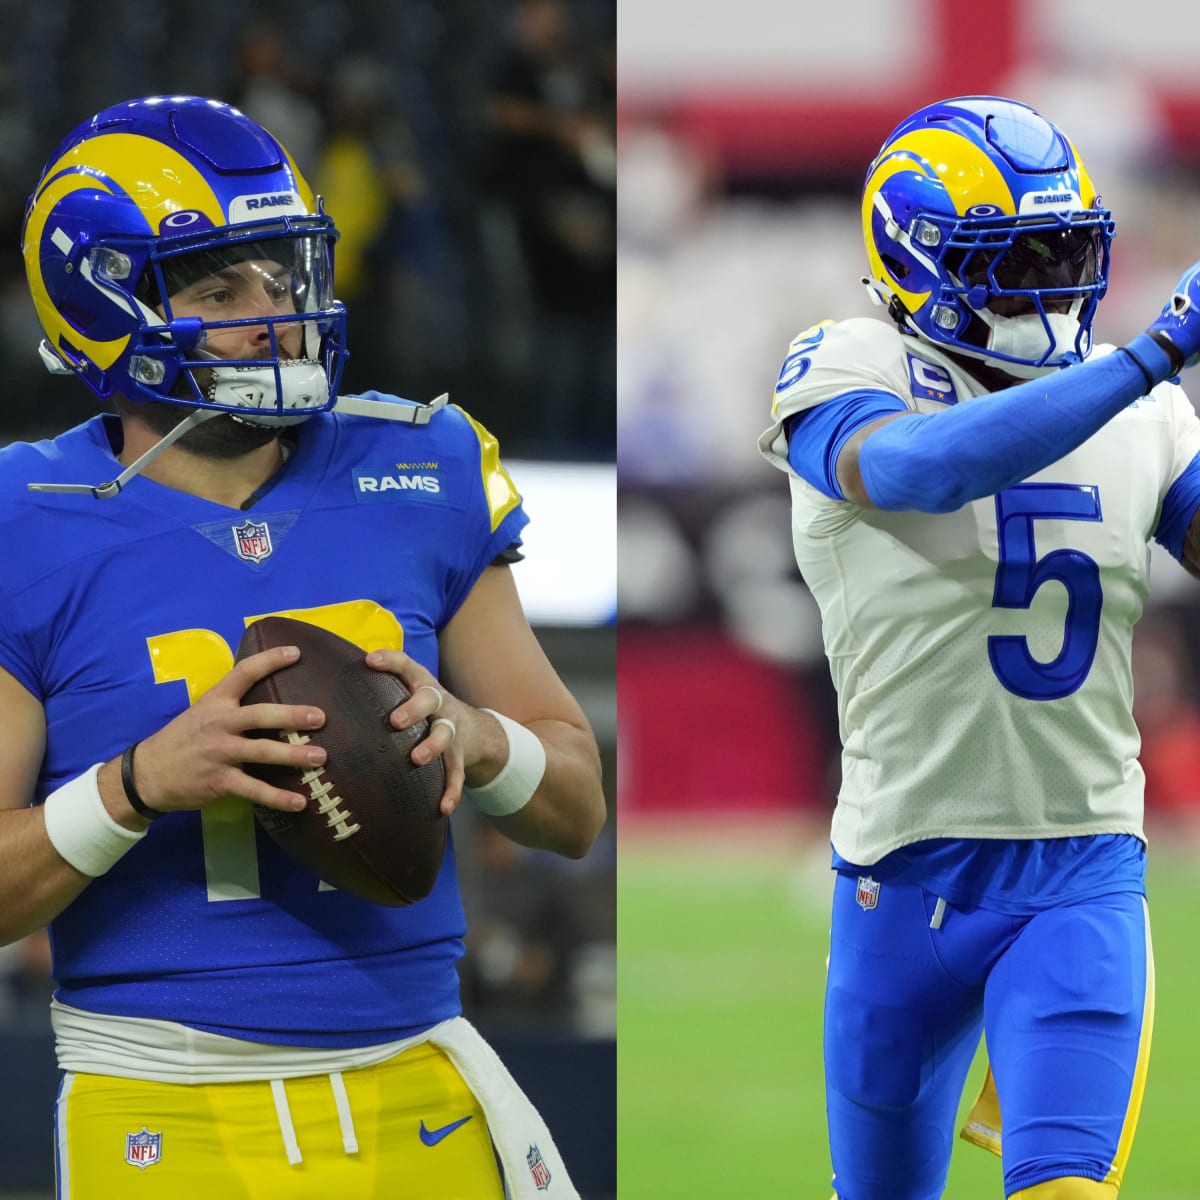 Twitter reacts to Rams adding Baker Mayfield